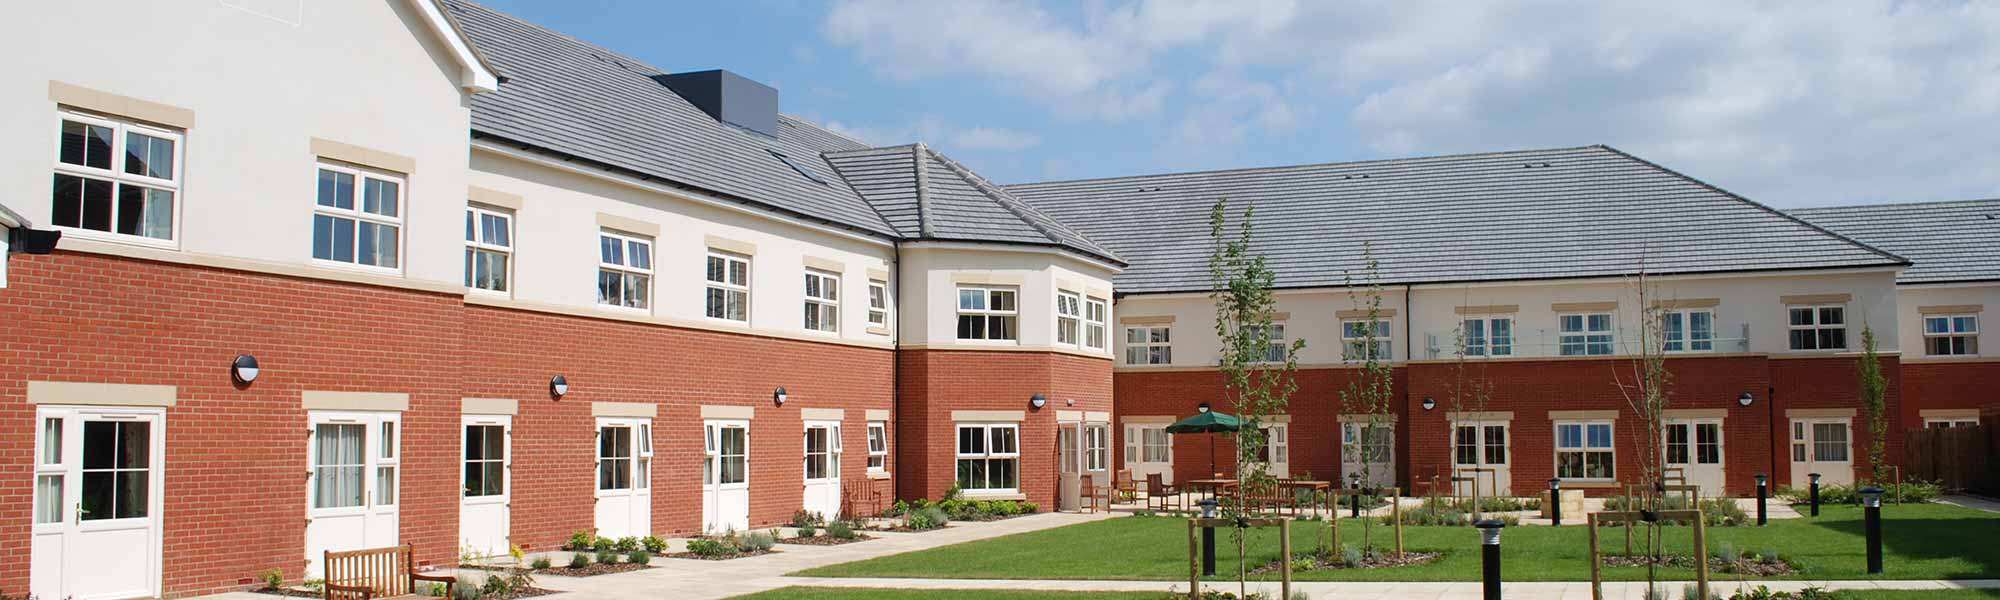 Seagrave House Care Home Corby